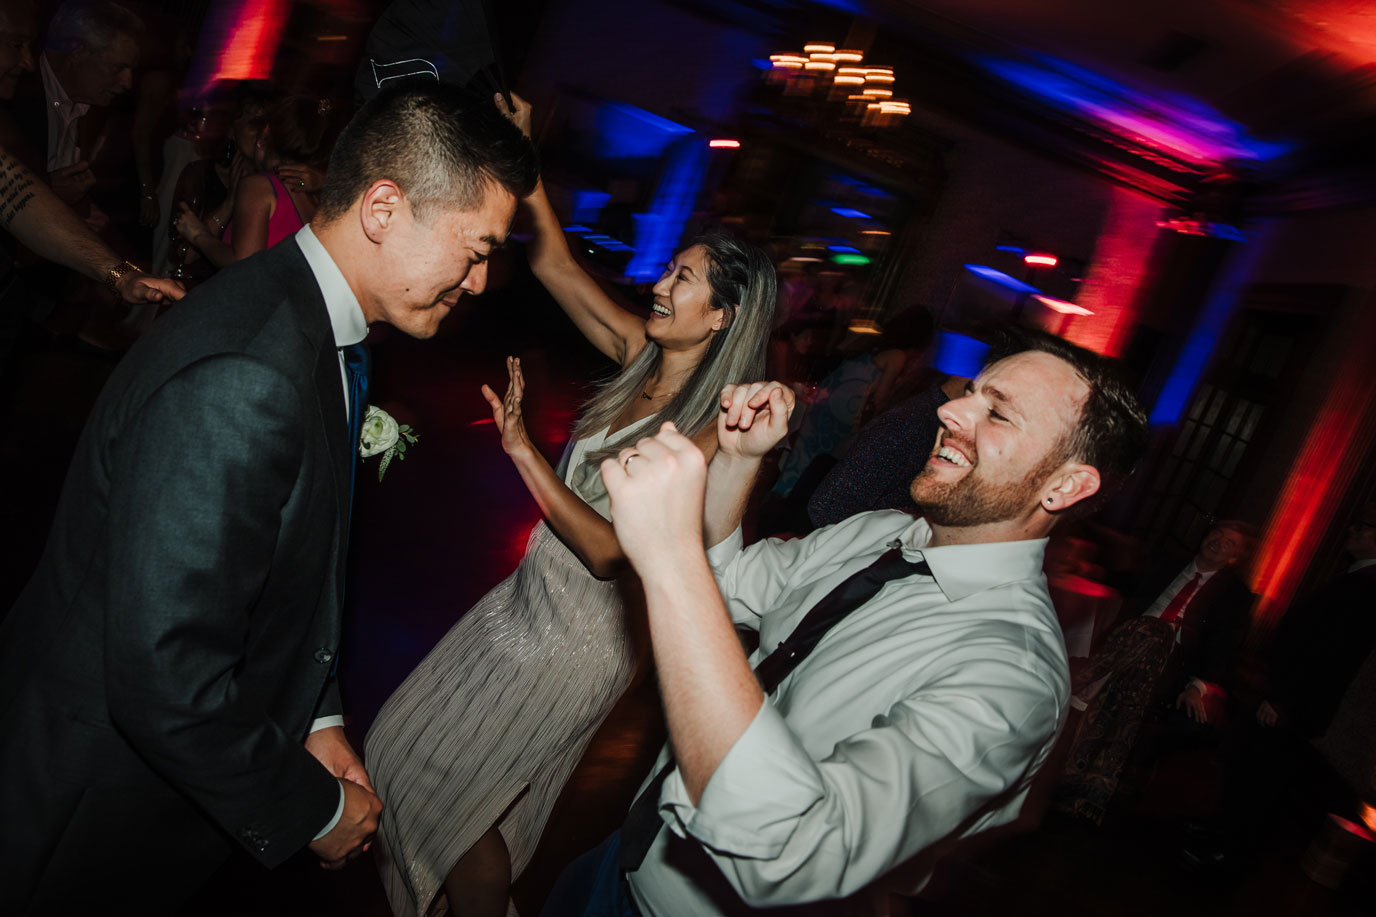 Grooms dancing at their super fun reception - The University Club of San Francisco